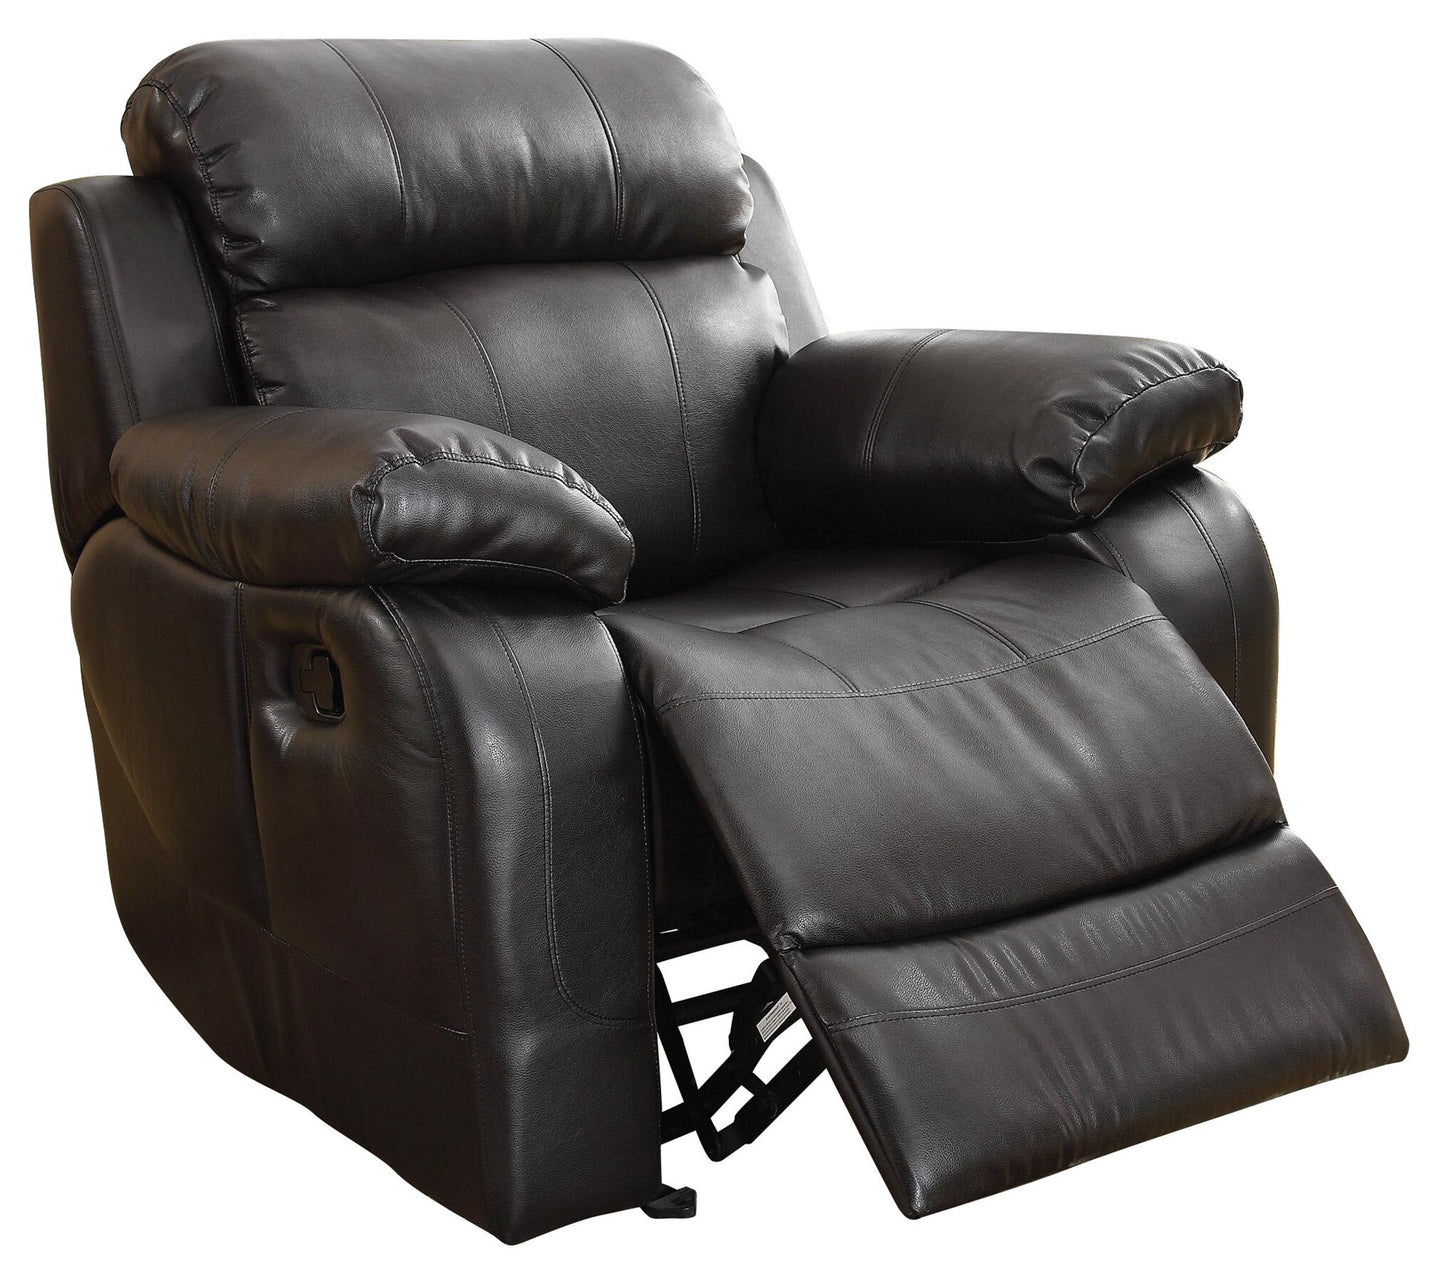 Homelegance Marille2PC Set Double Glider Reclining Love Seat with Console & Glider Recliner Chair in Leather - Black